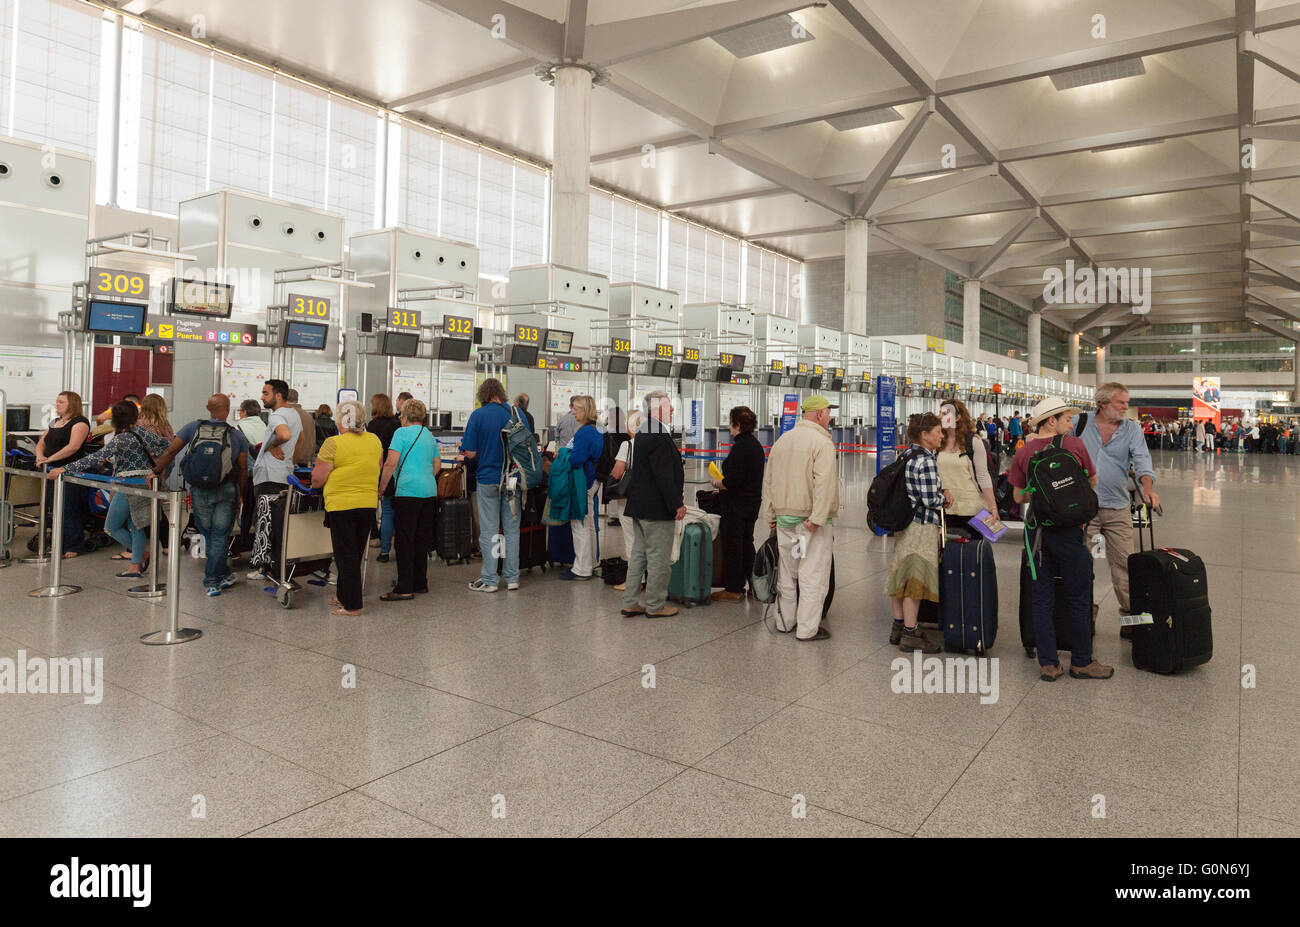 People queuing at the check in desks, terminal 2, Malaga airport interior, Costa del Sol, Spain Europe Stock Photo